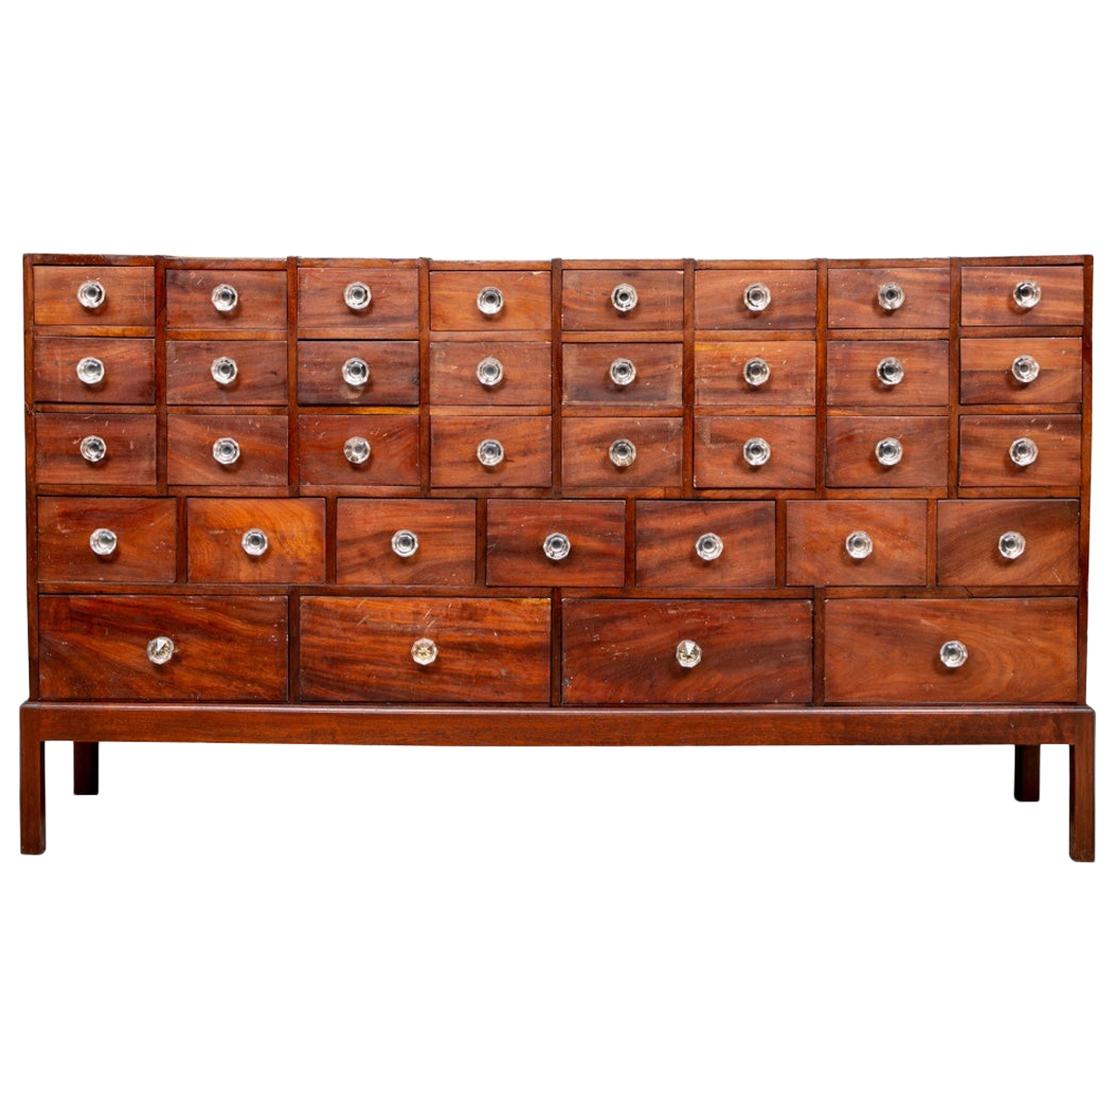 Antique English 36 Drawer Apothecary Chest, C. 1870